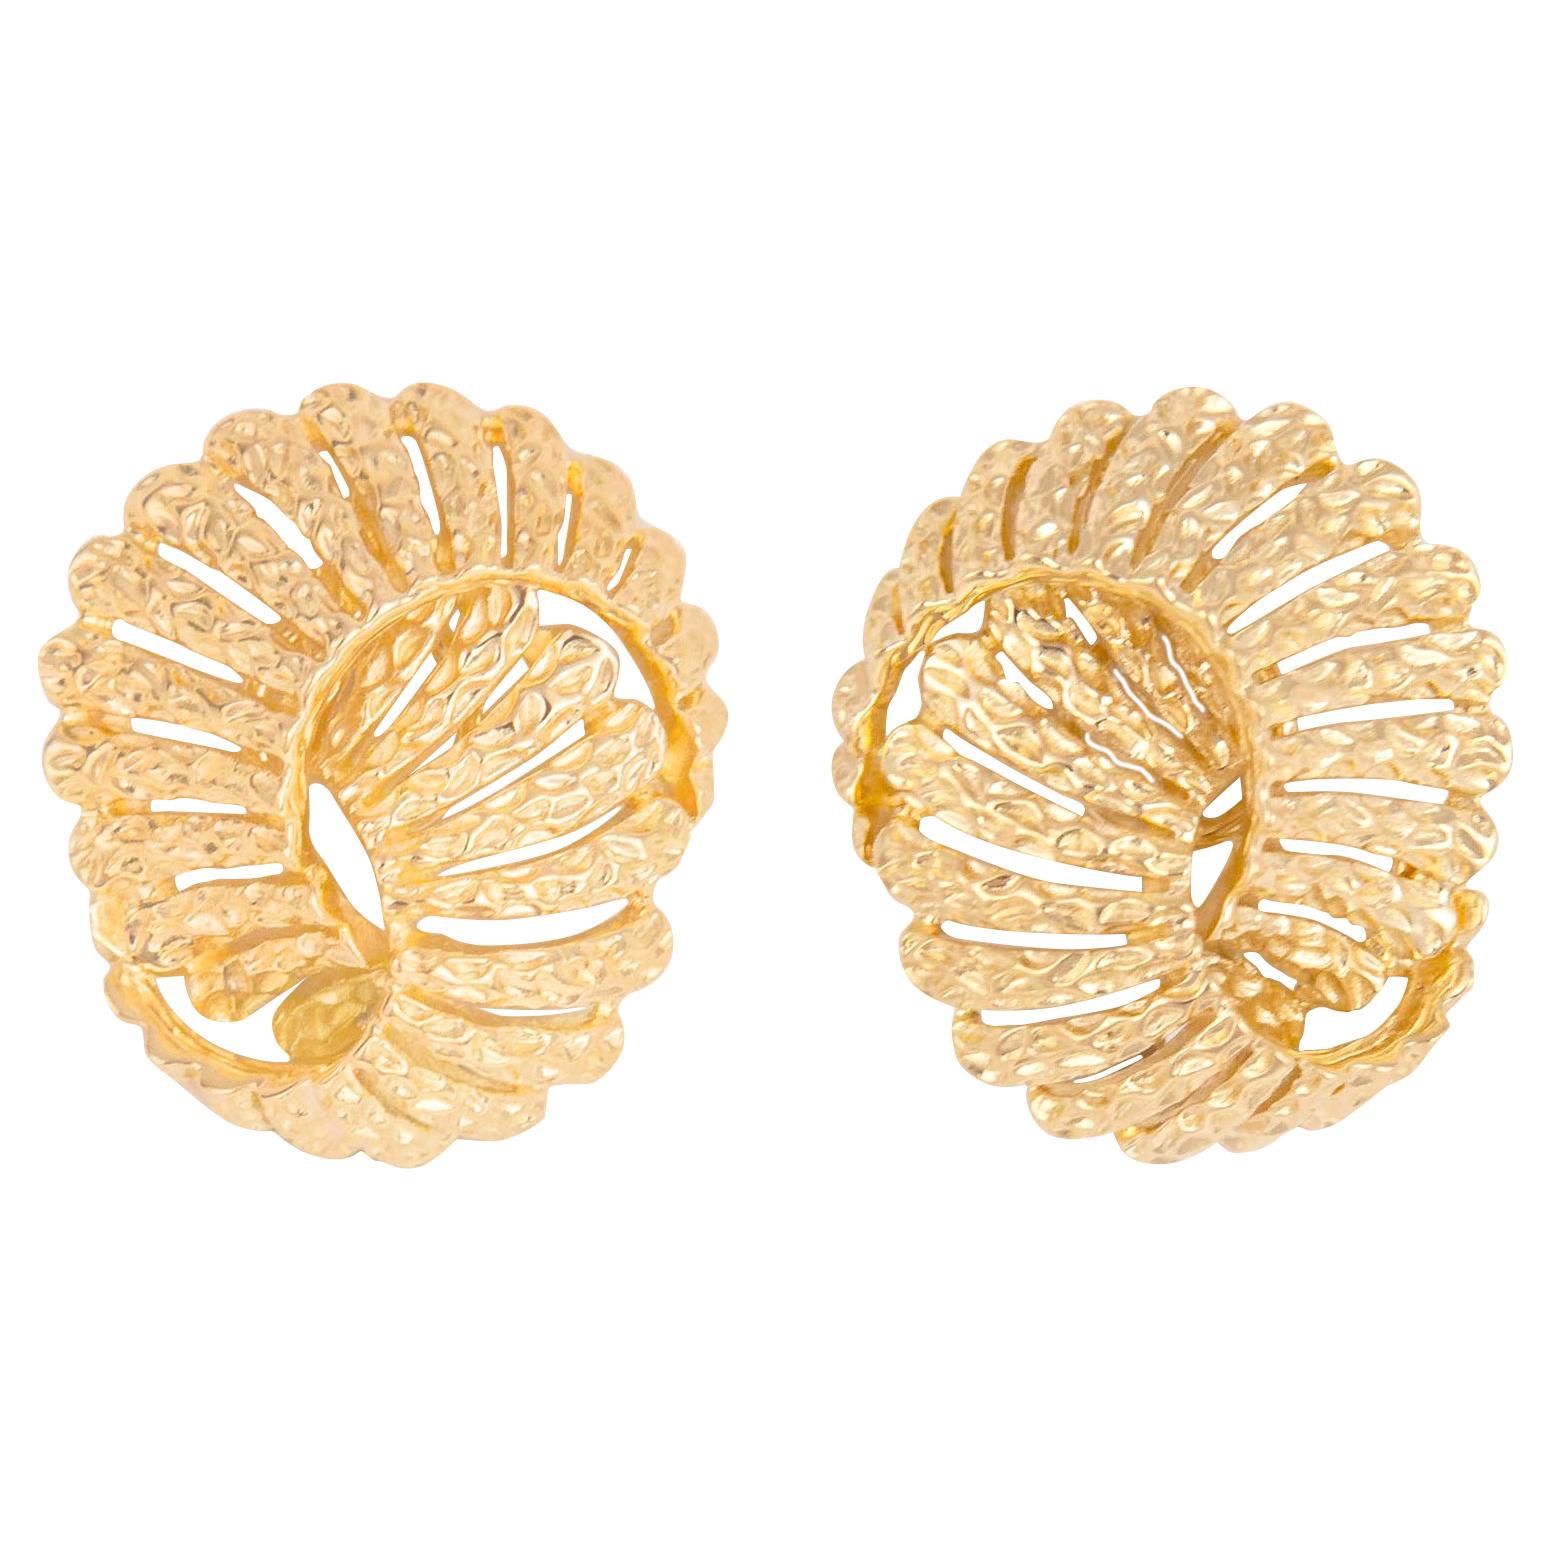 Vintage Tiffany & Co. Textured Gold Earrings